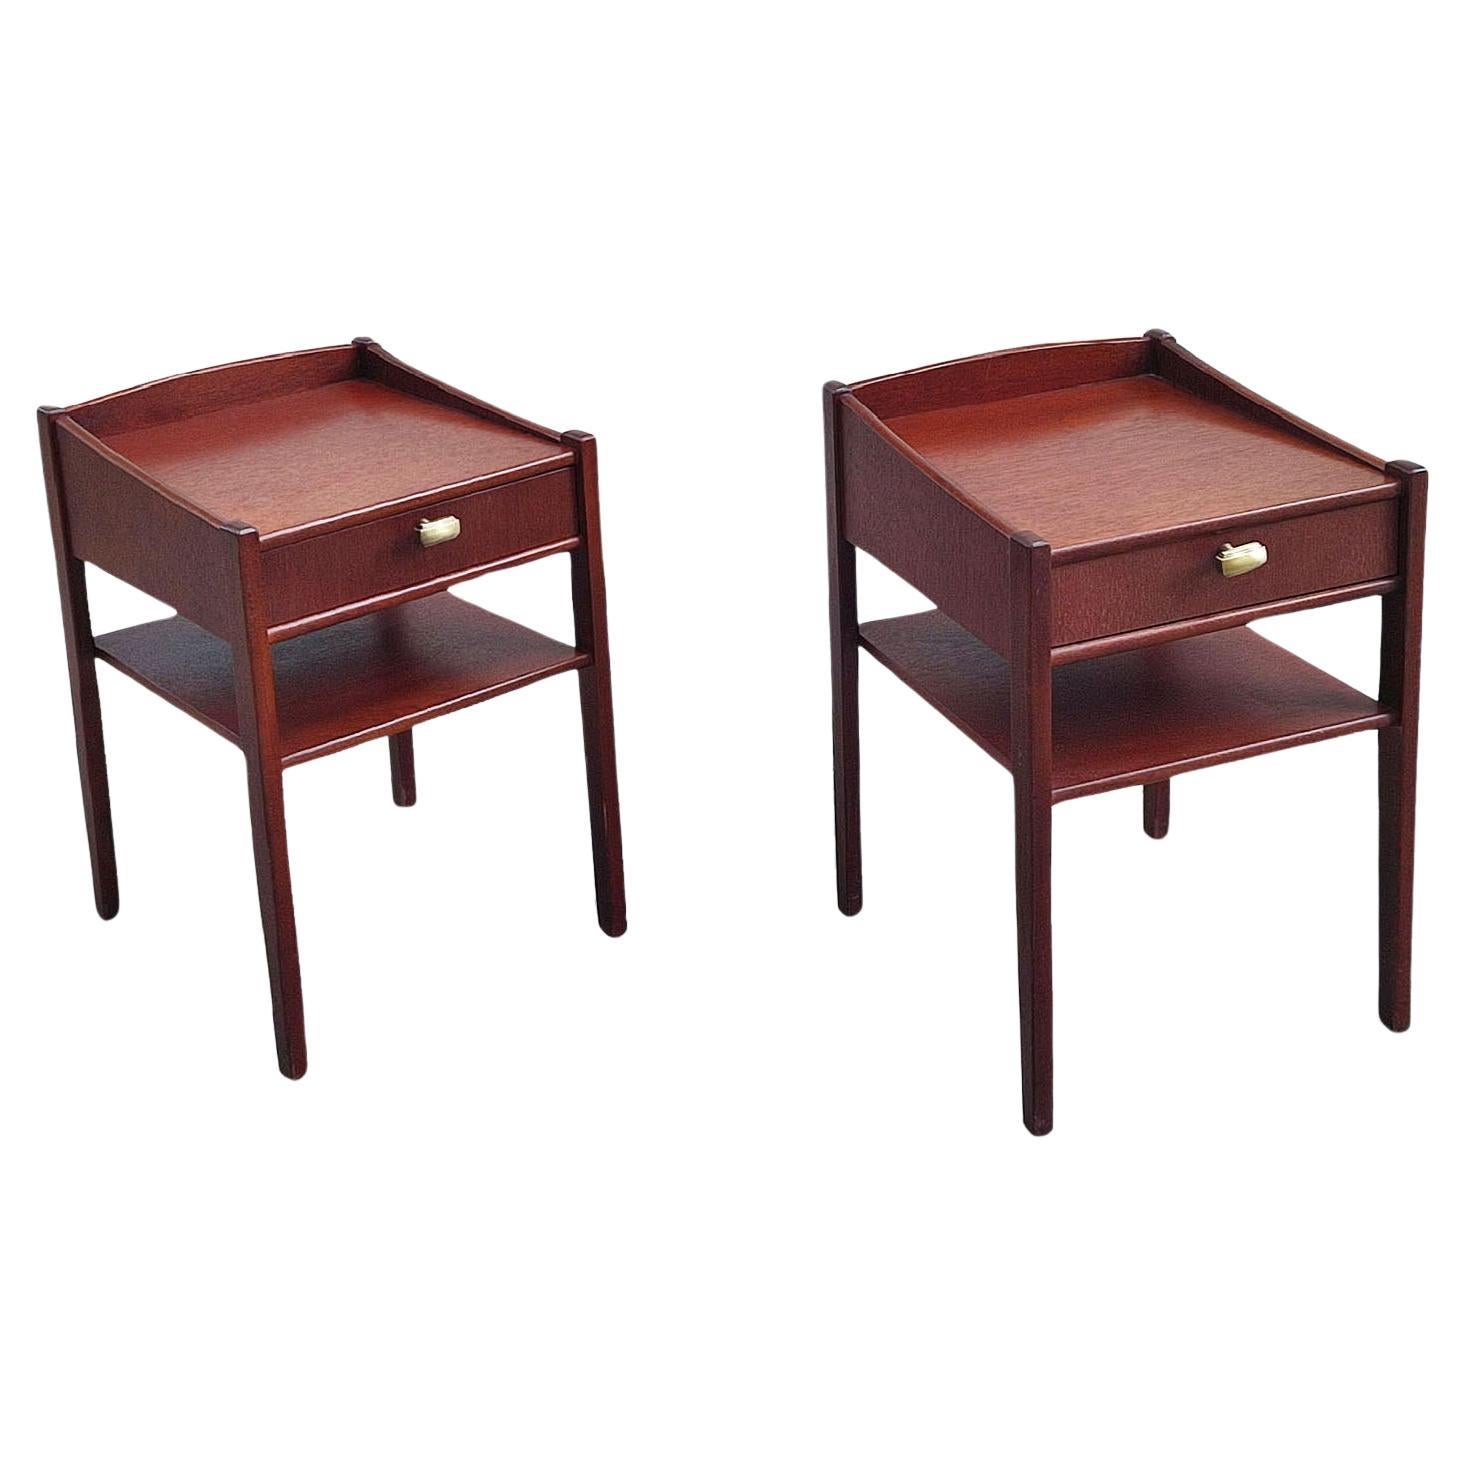 Pair of Mid-century Swedish Mahogany Nightstands, Bedside Tables, 1960s